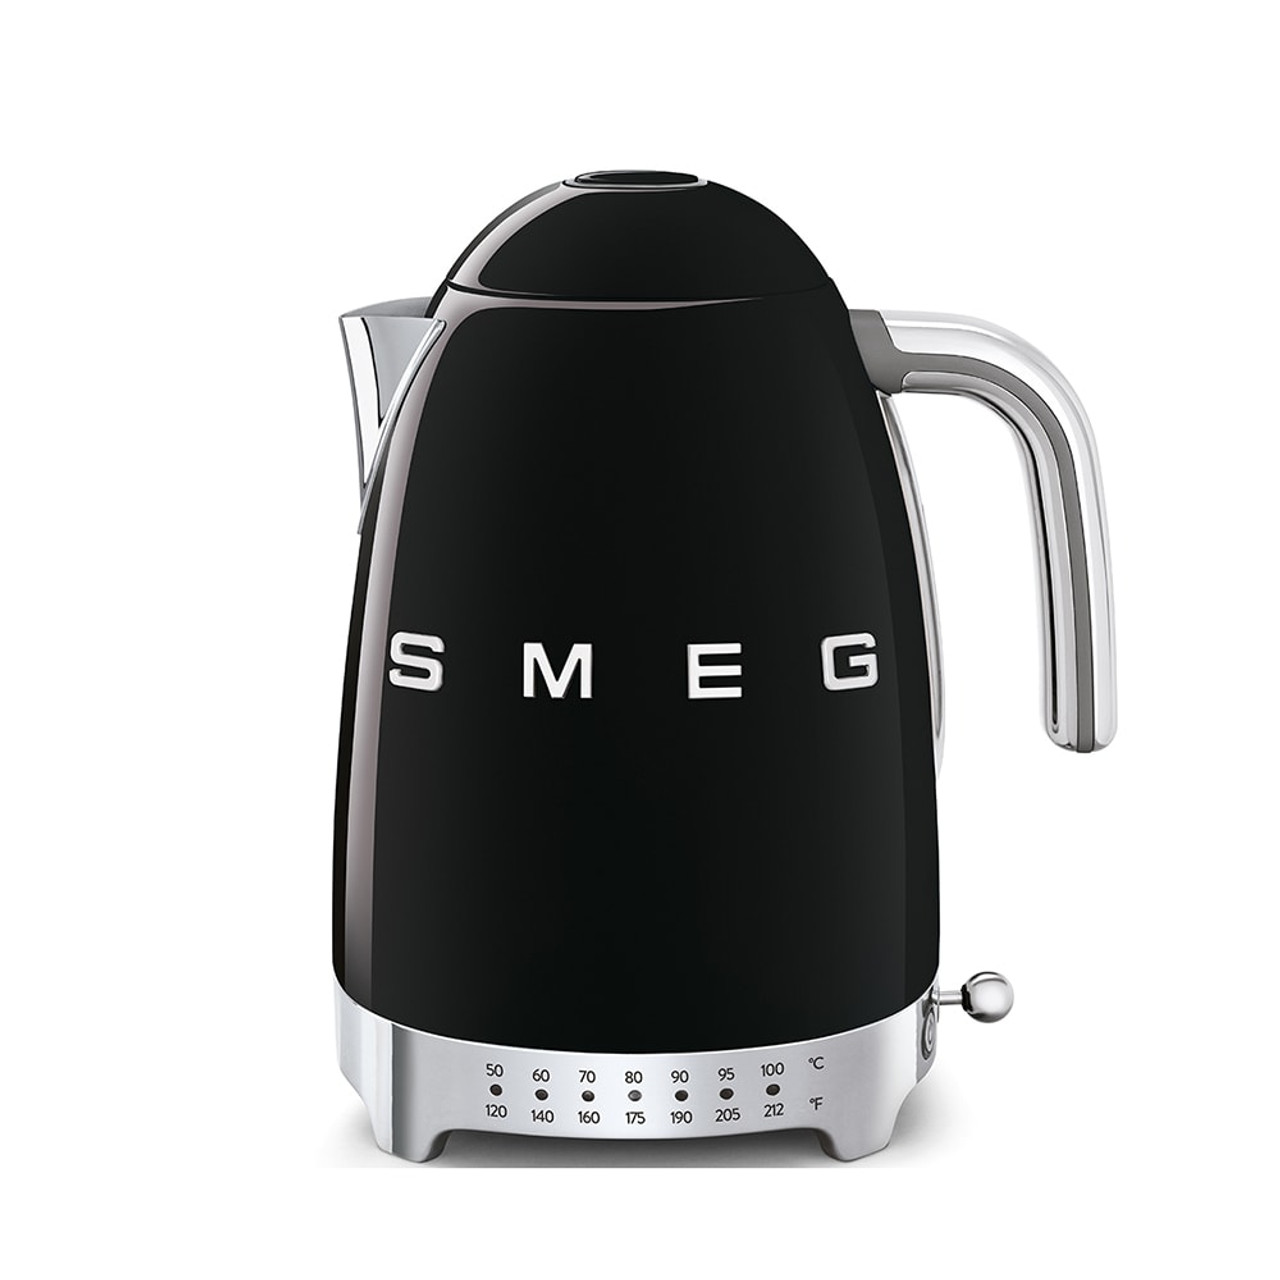 https://cdn11.bigcommerce.com/s-hccytny0od/images/stencil/1280x1280/products/2504/8620/smeg-variable-temperature-kettle-black__91119.1628802731.jpg?c=2?imbypass=on